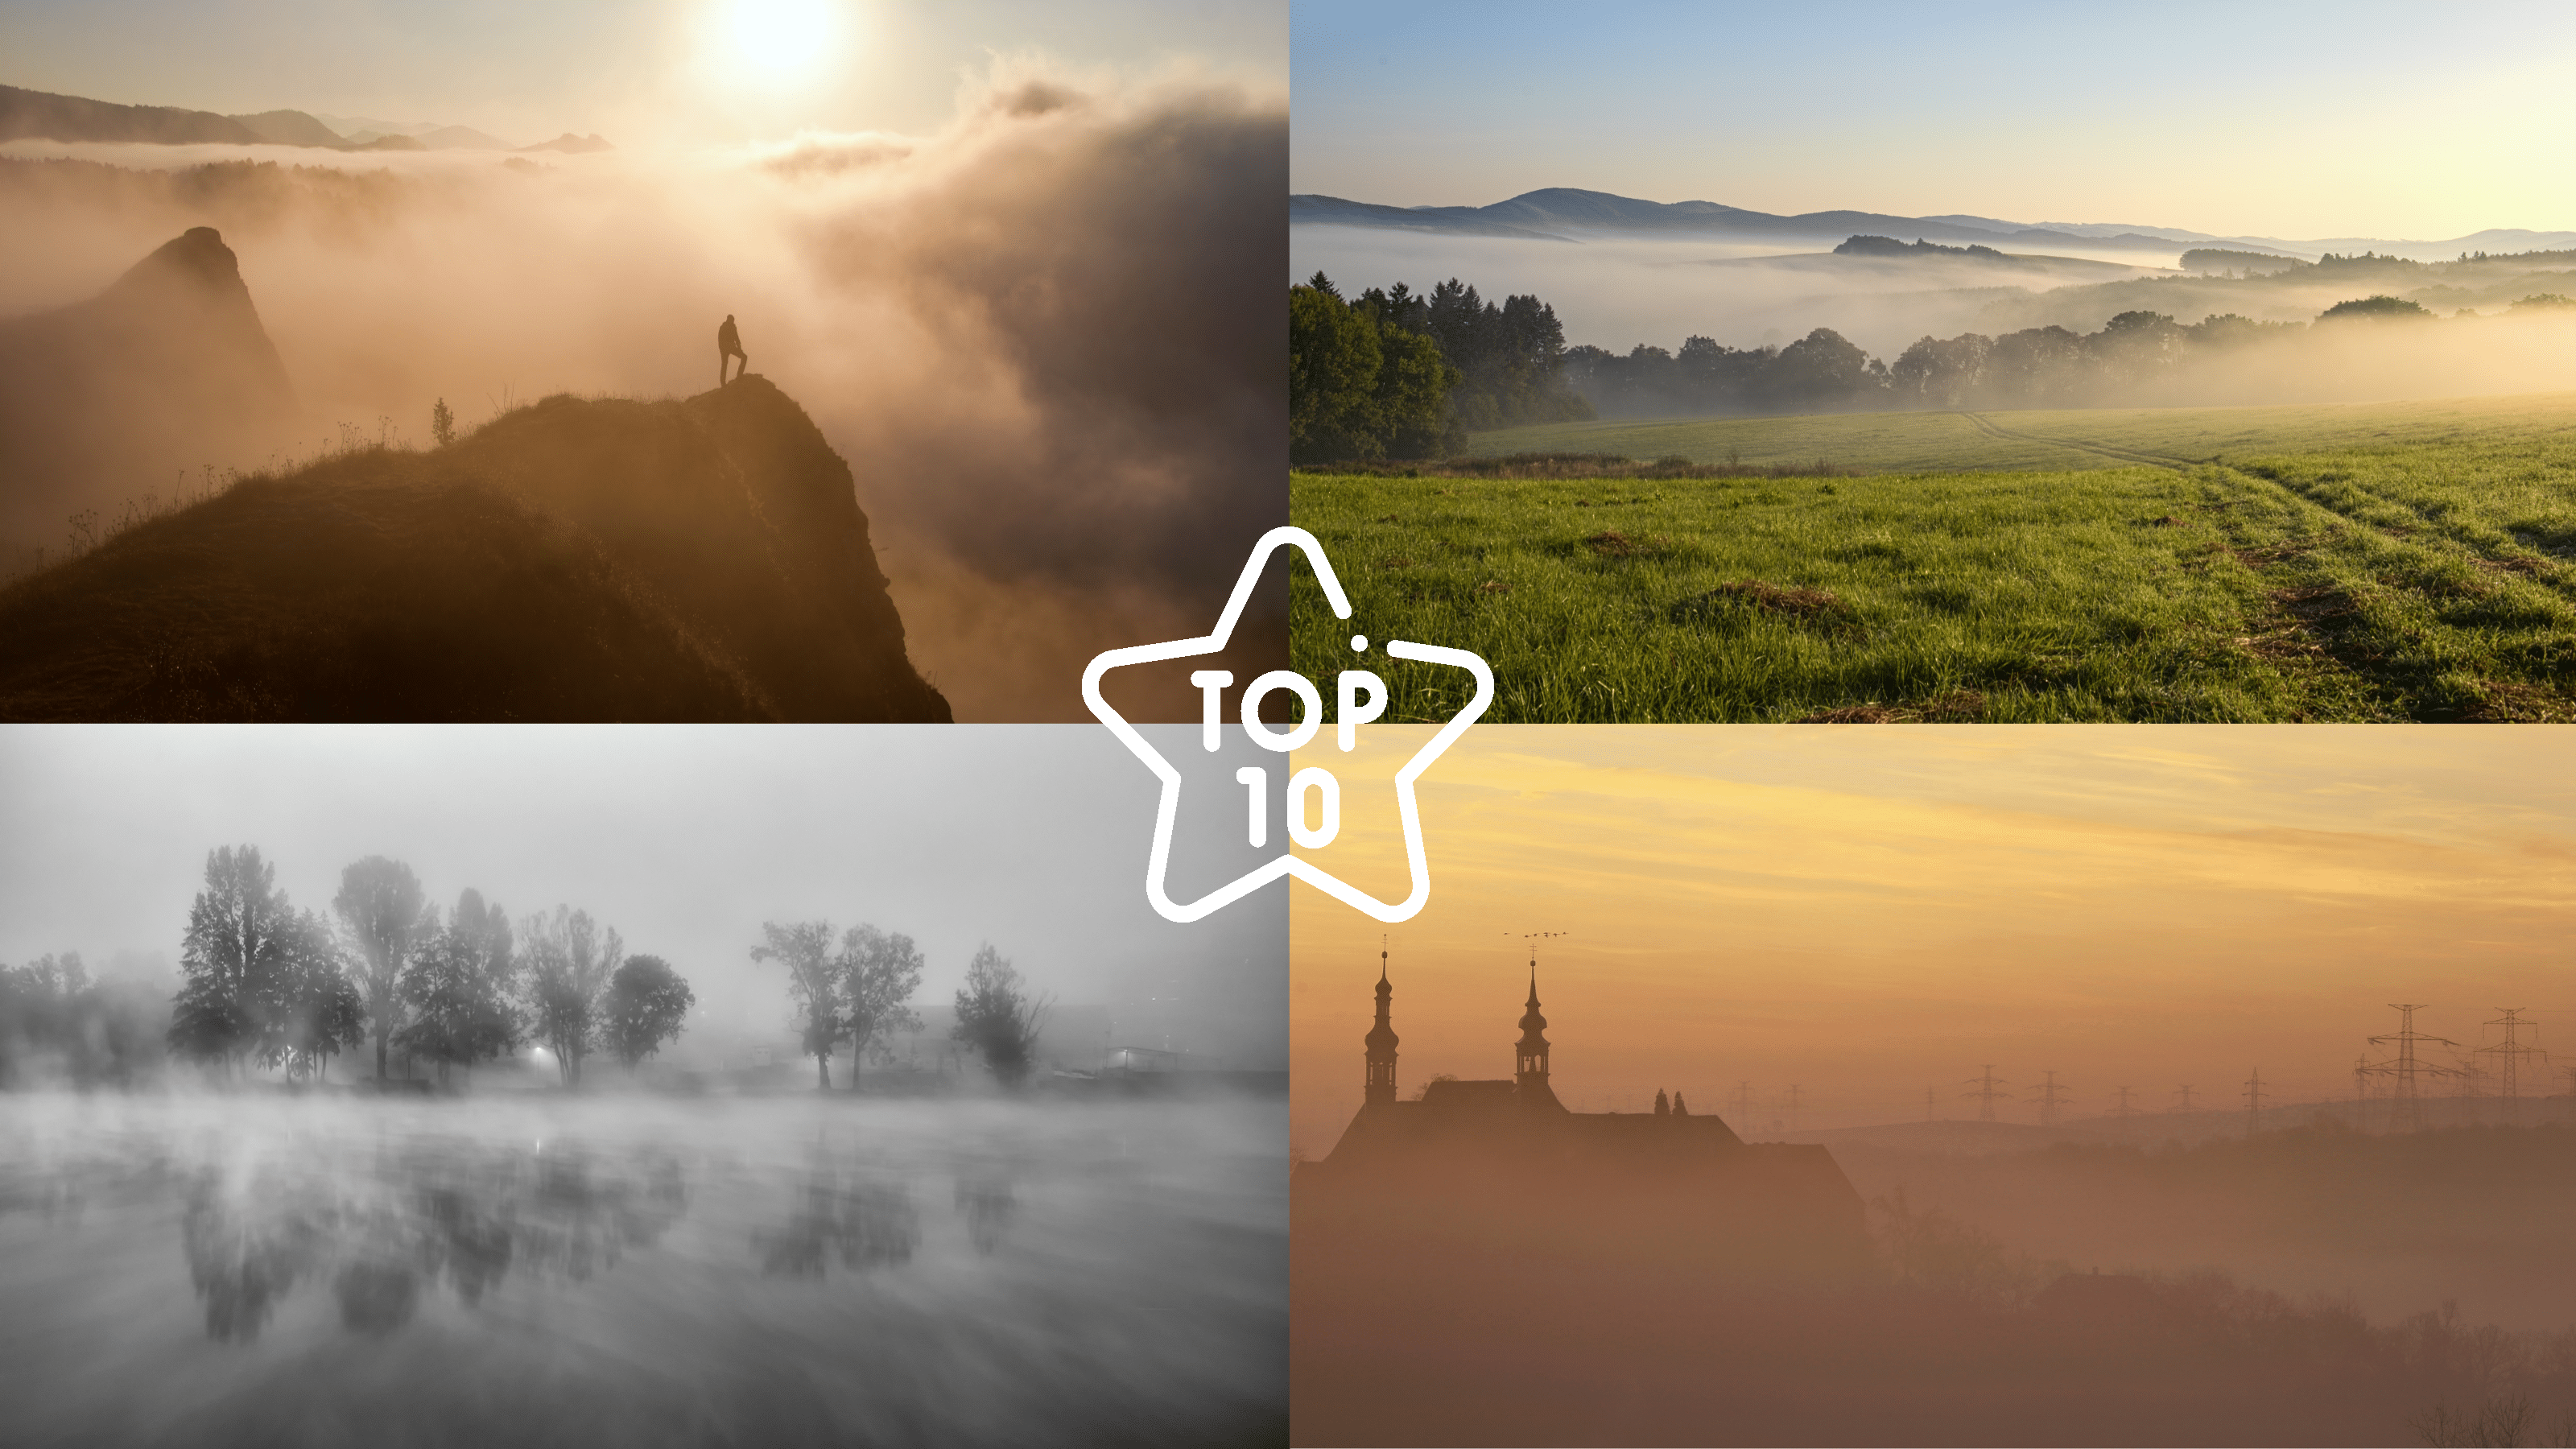 TOP 10 Photos from Our Readers - Theme Mysterious Autumn Mist